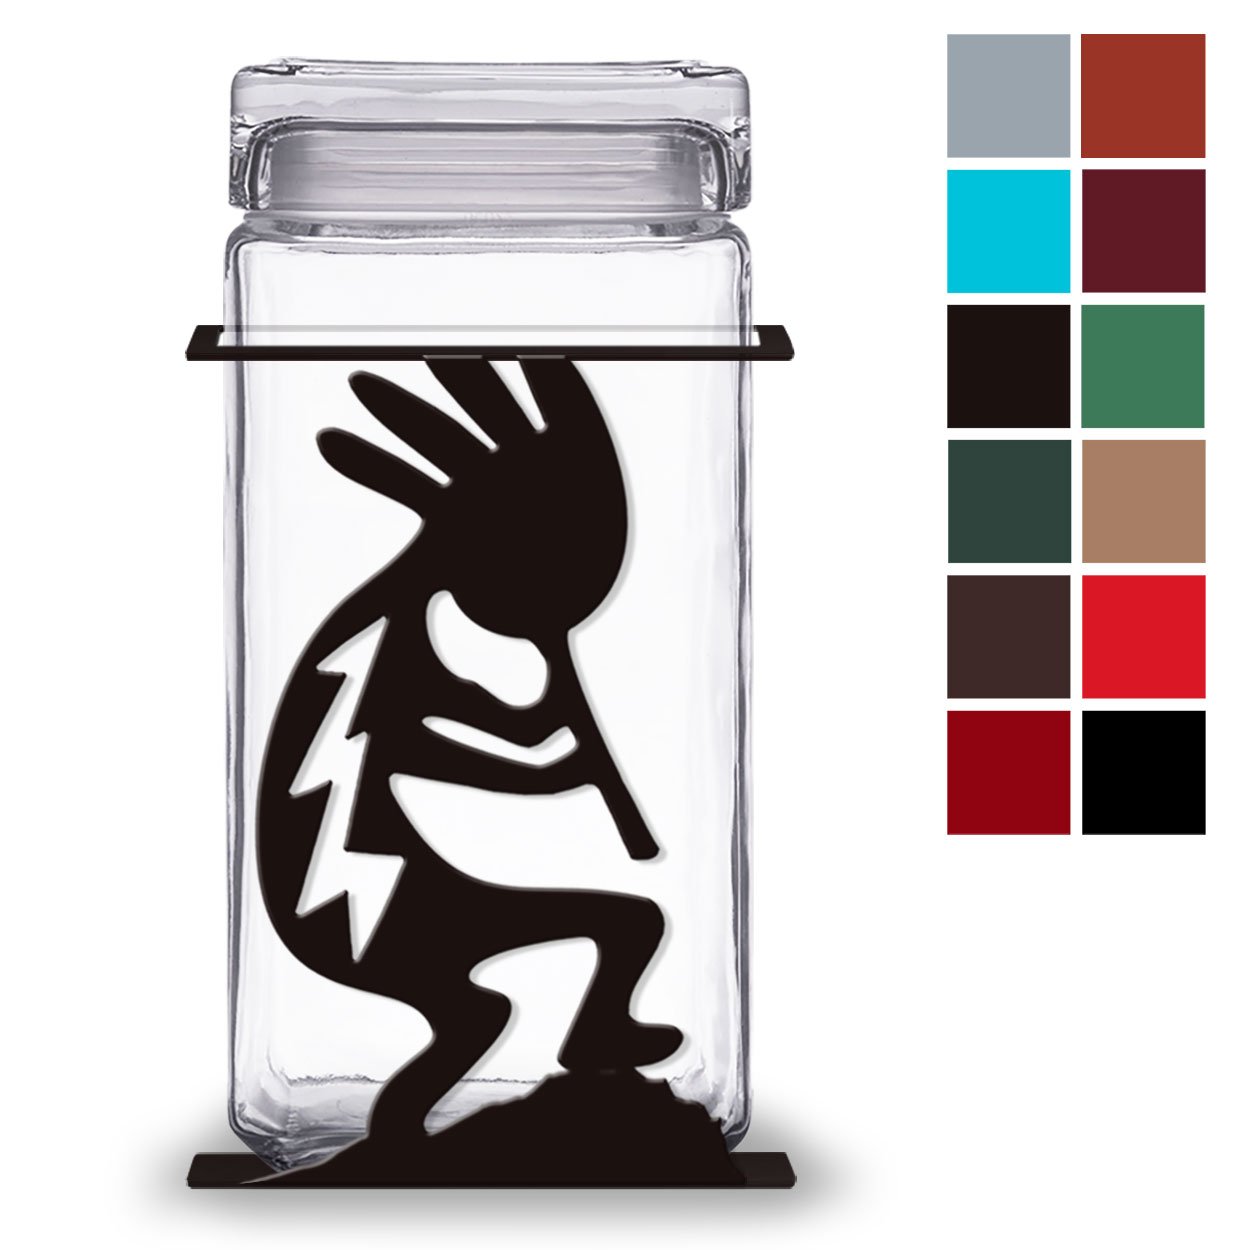 620053 - Kokopelli 2-Quart Glass and Metal Kitchen Canister - Choose Color